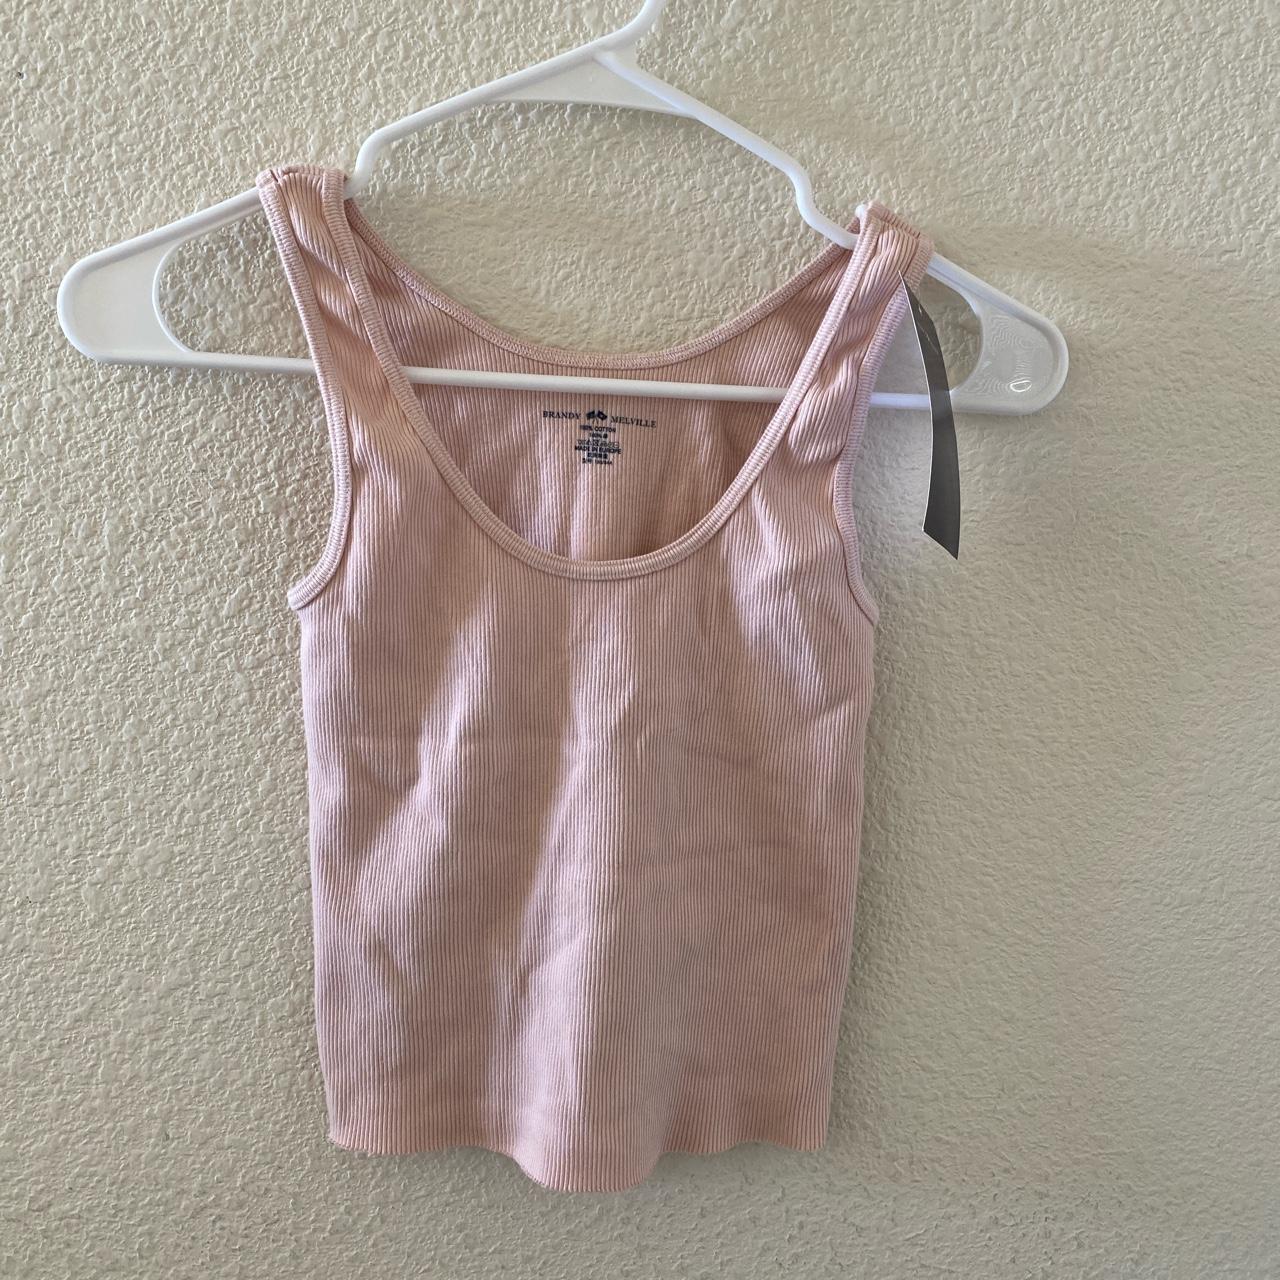 Sweetest lil Brandy Melville tank top 🍓🍄 pink and - Depop